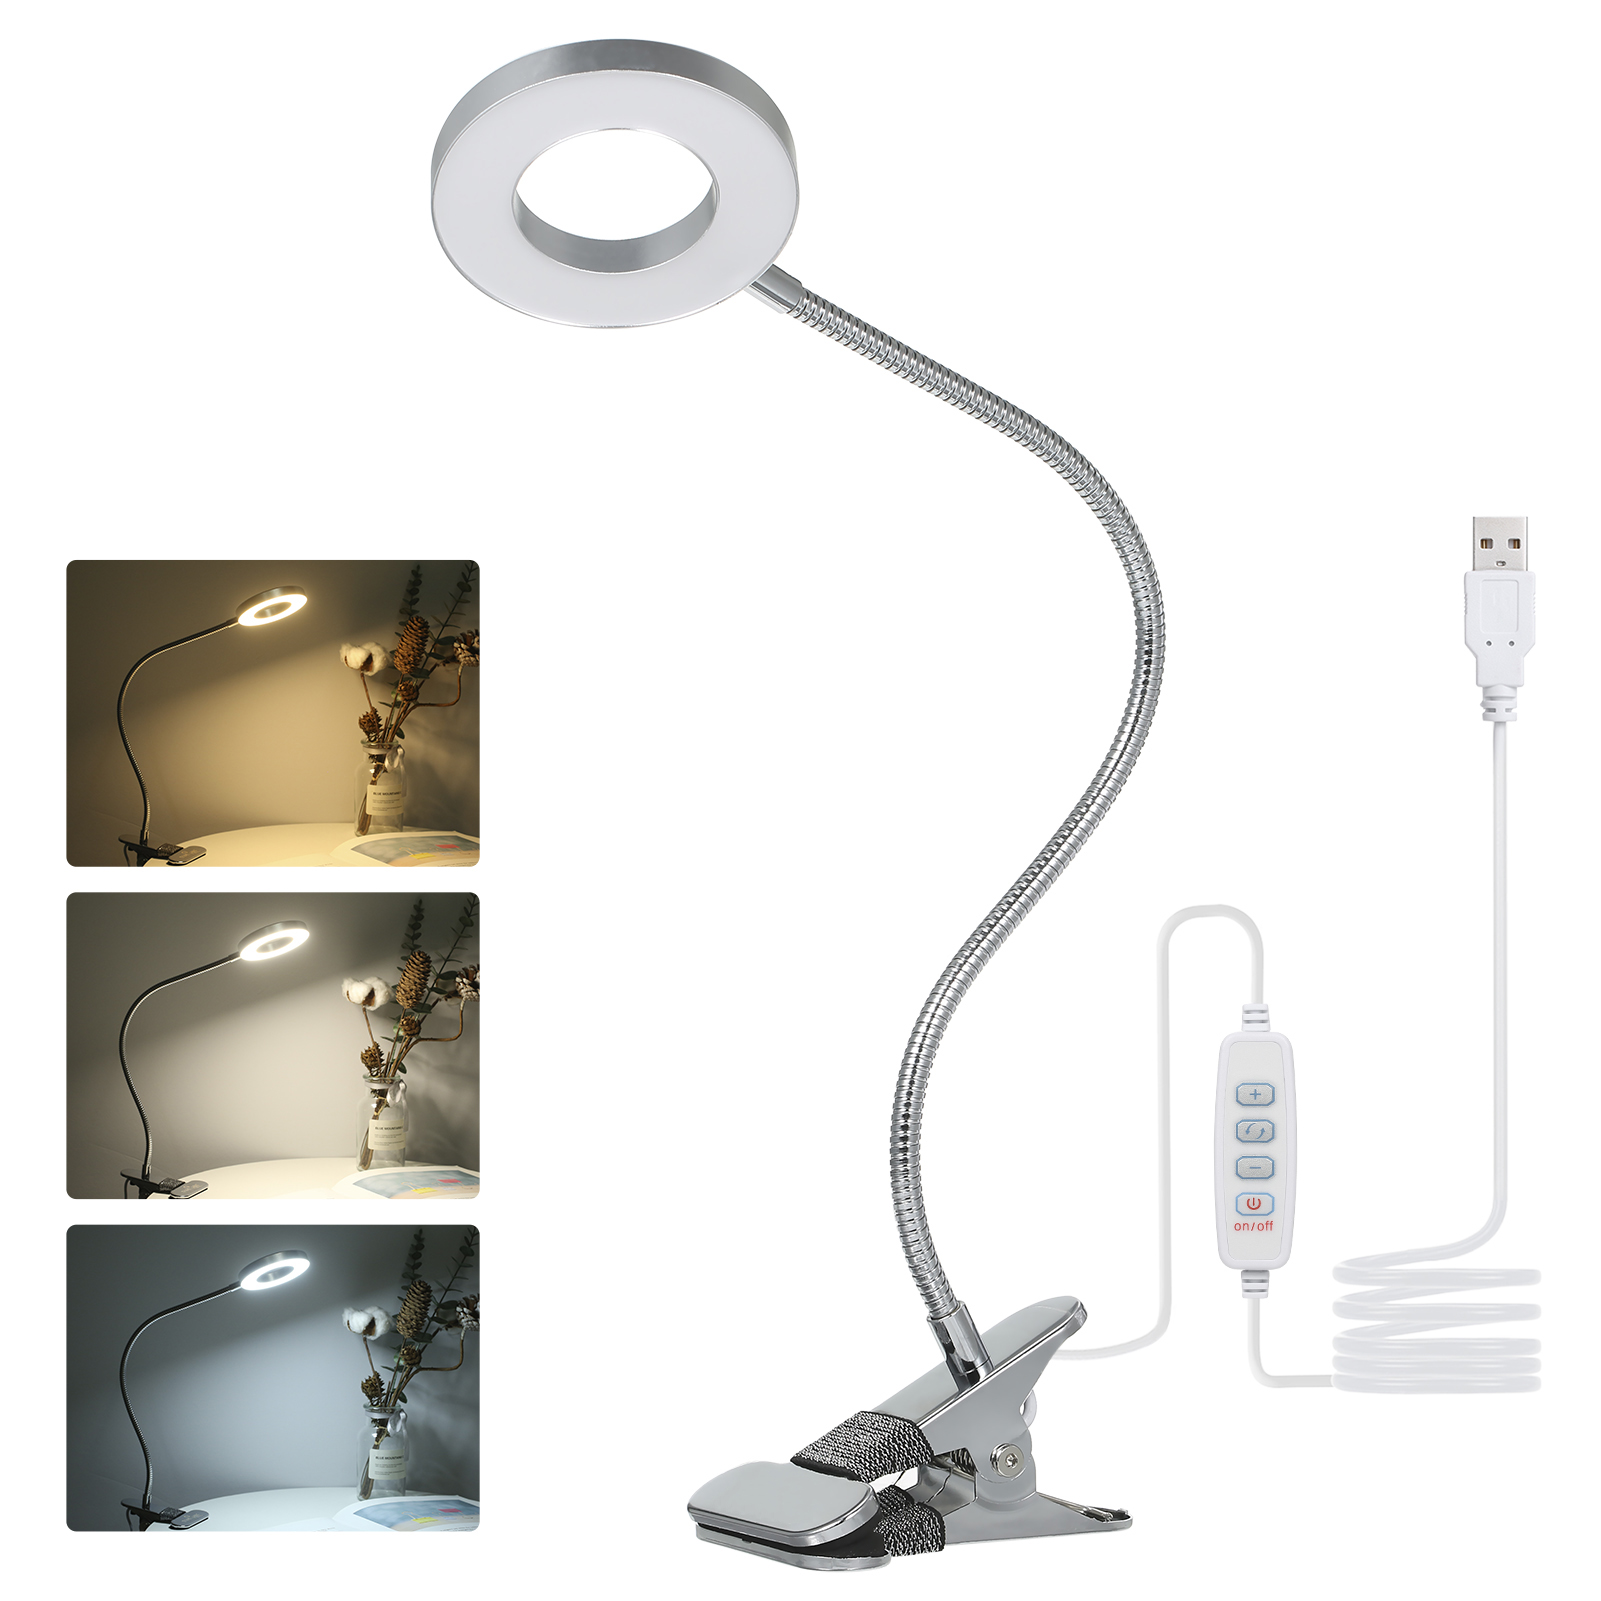 LED Magnifier lamps with flexible metal swivel arm-1.jpg